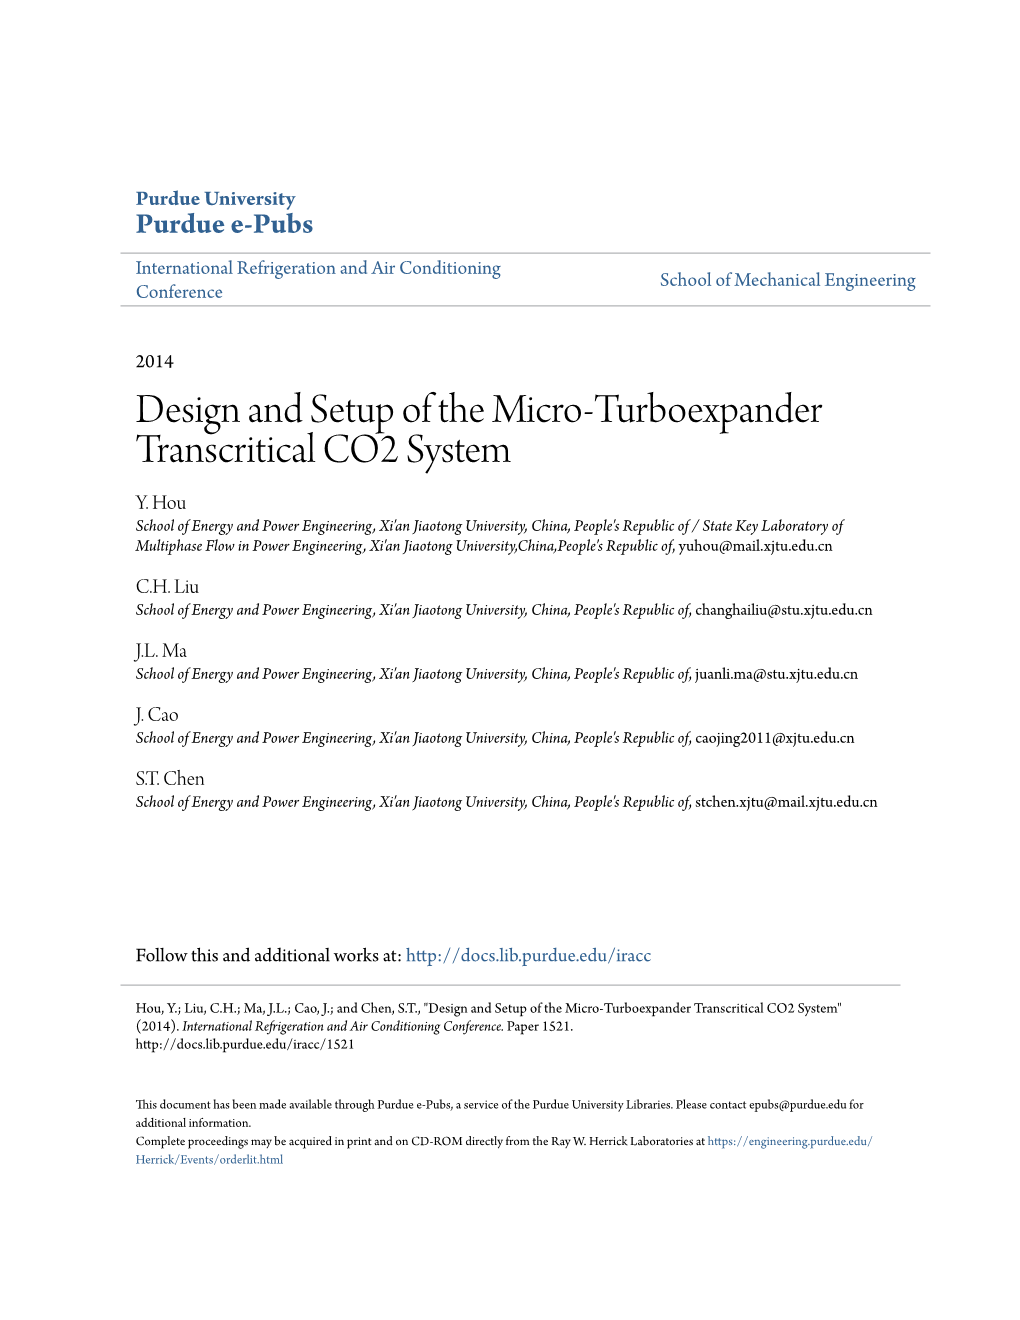 Design and Setup of the Micro-Turboexpander Transcritical CO2 System Y